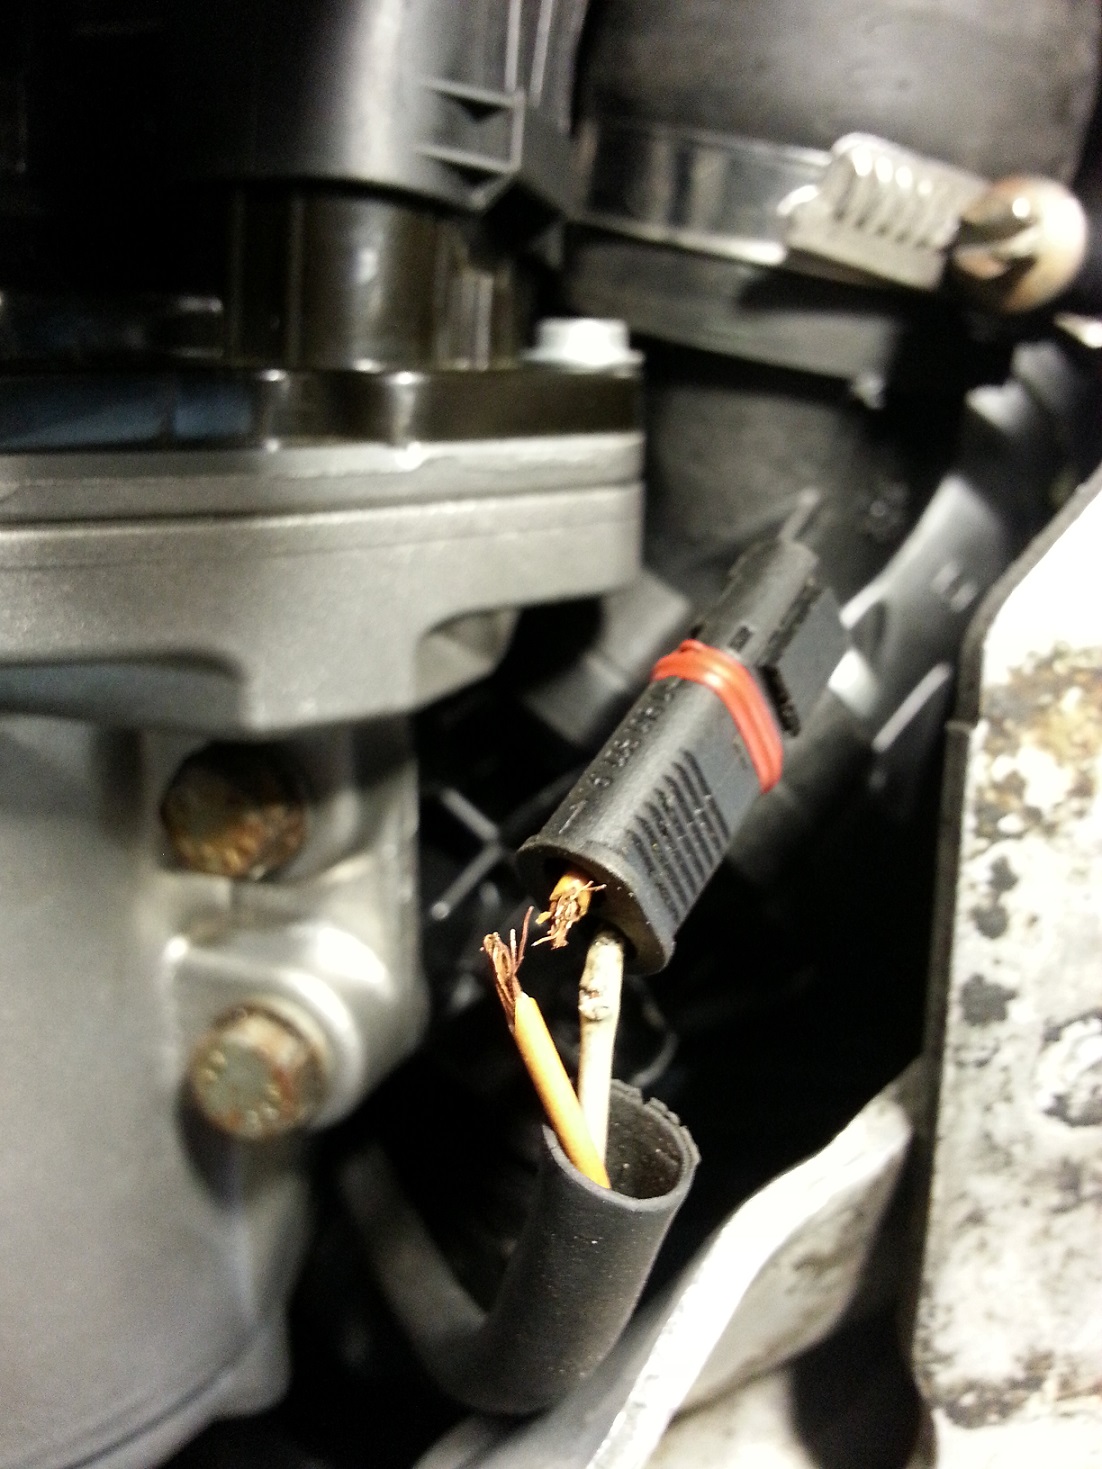 Bmw E90 Thermostat Wiring Harness from www.e90post.com